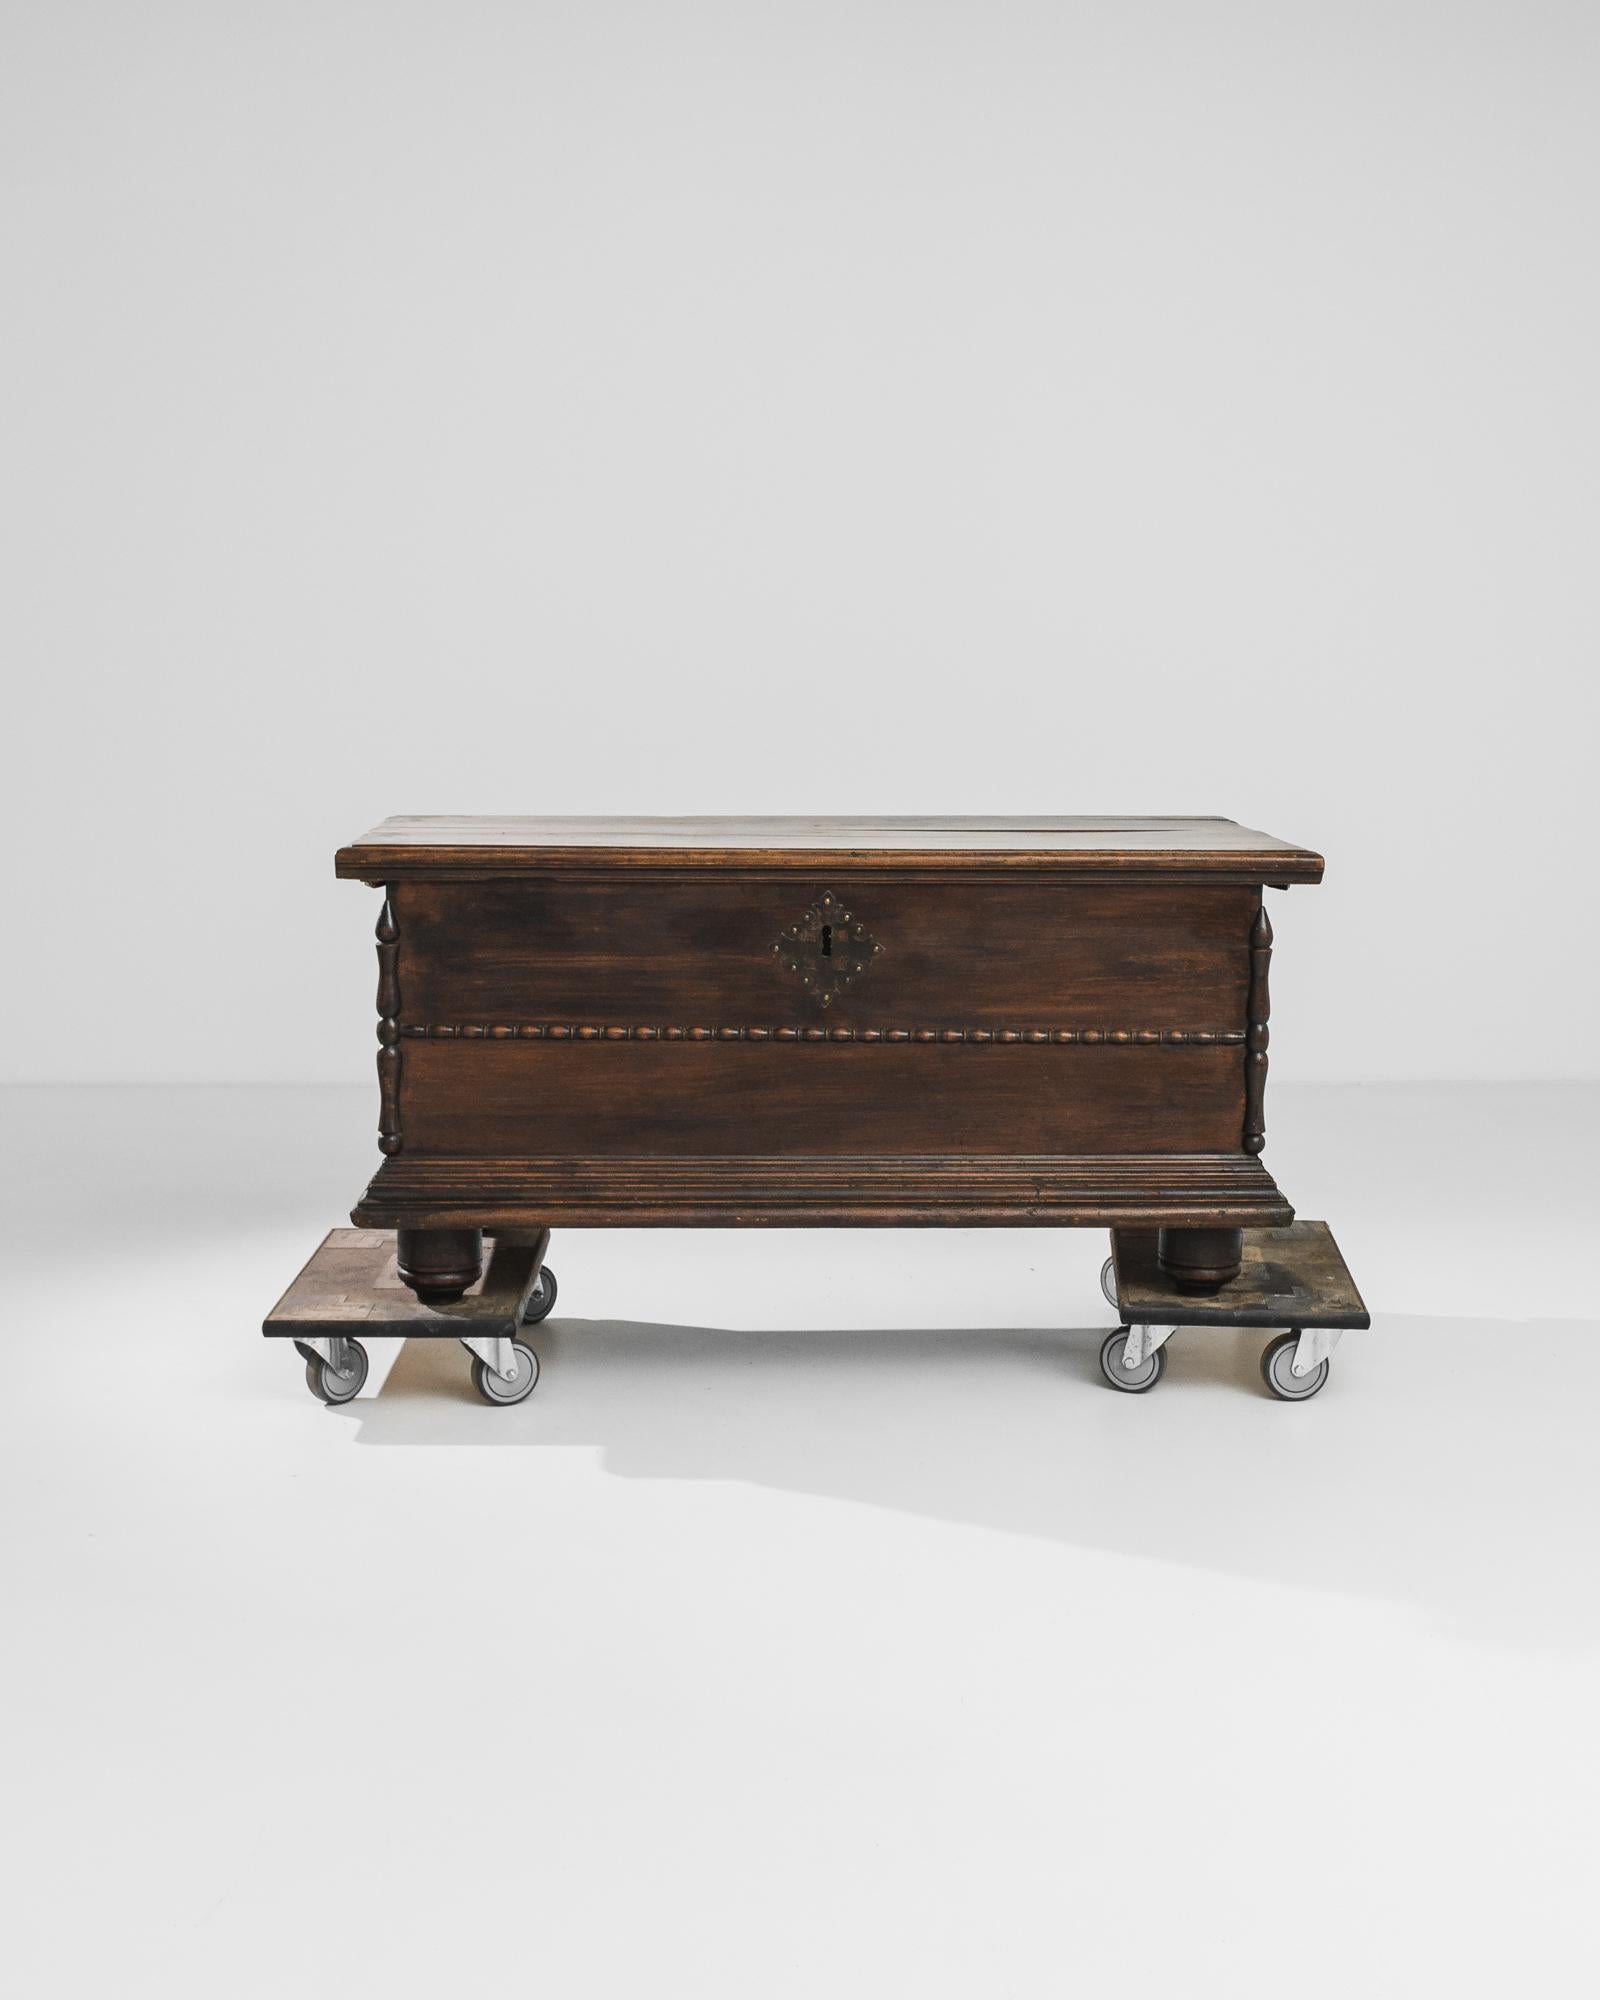 A wooden trunk from Southern Europe, produced circa 1800. A handsome antique trunk constructed of dark wood on four squat feet, featuring brass escutcheon and hinges and a flip-top lid. Rich details from the elaborate escutcheon to the woodwork